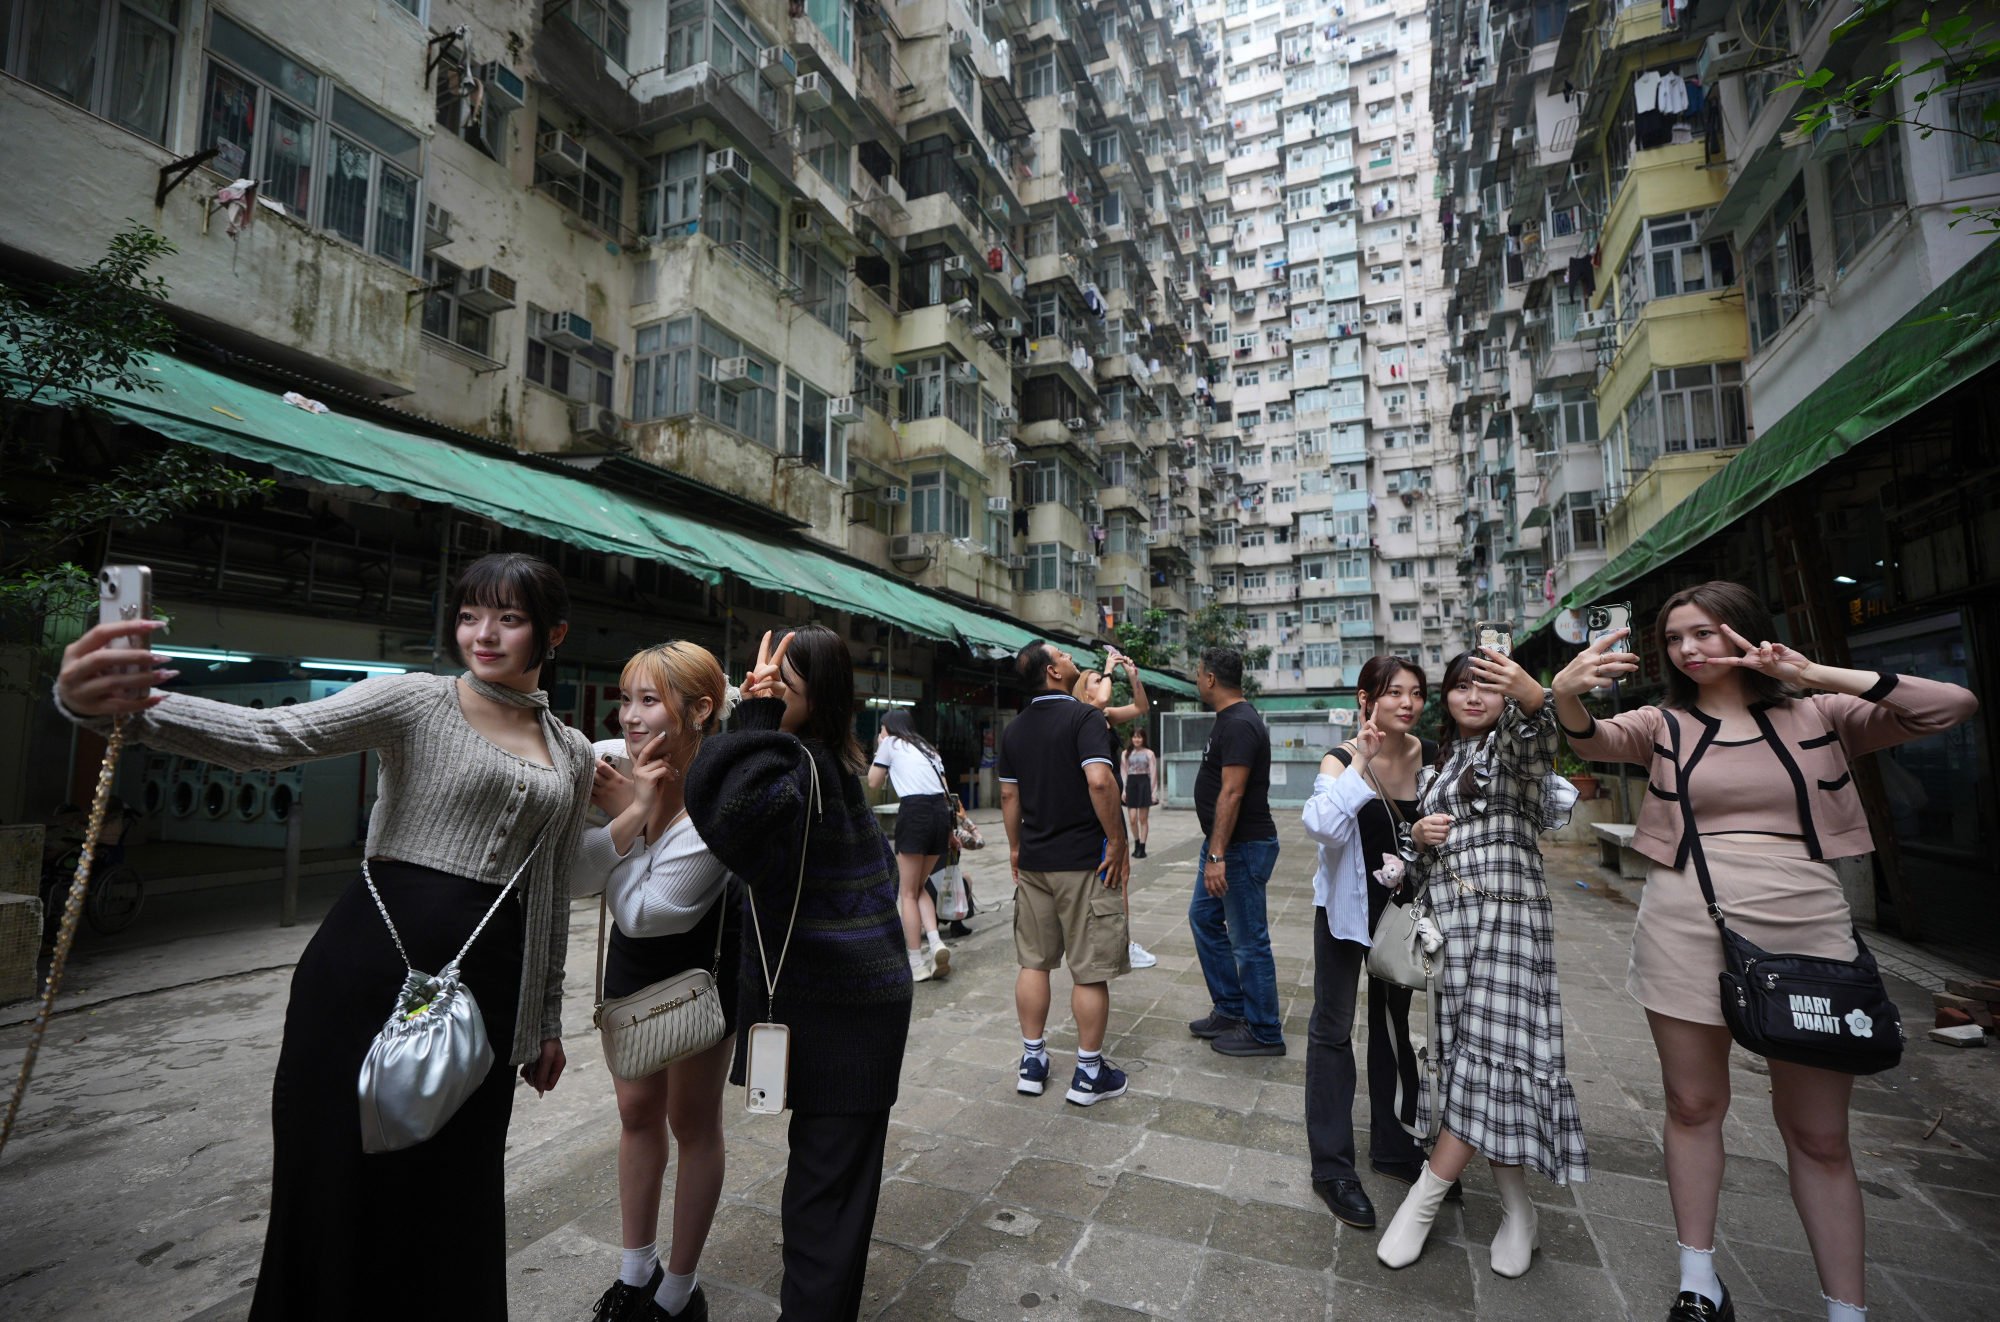 what is drawing tourists to hong kong? koreans seek ‘old city vibes’, filipinos eye disneyland and thais tour temples